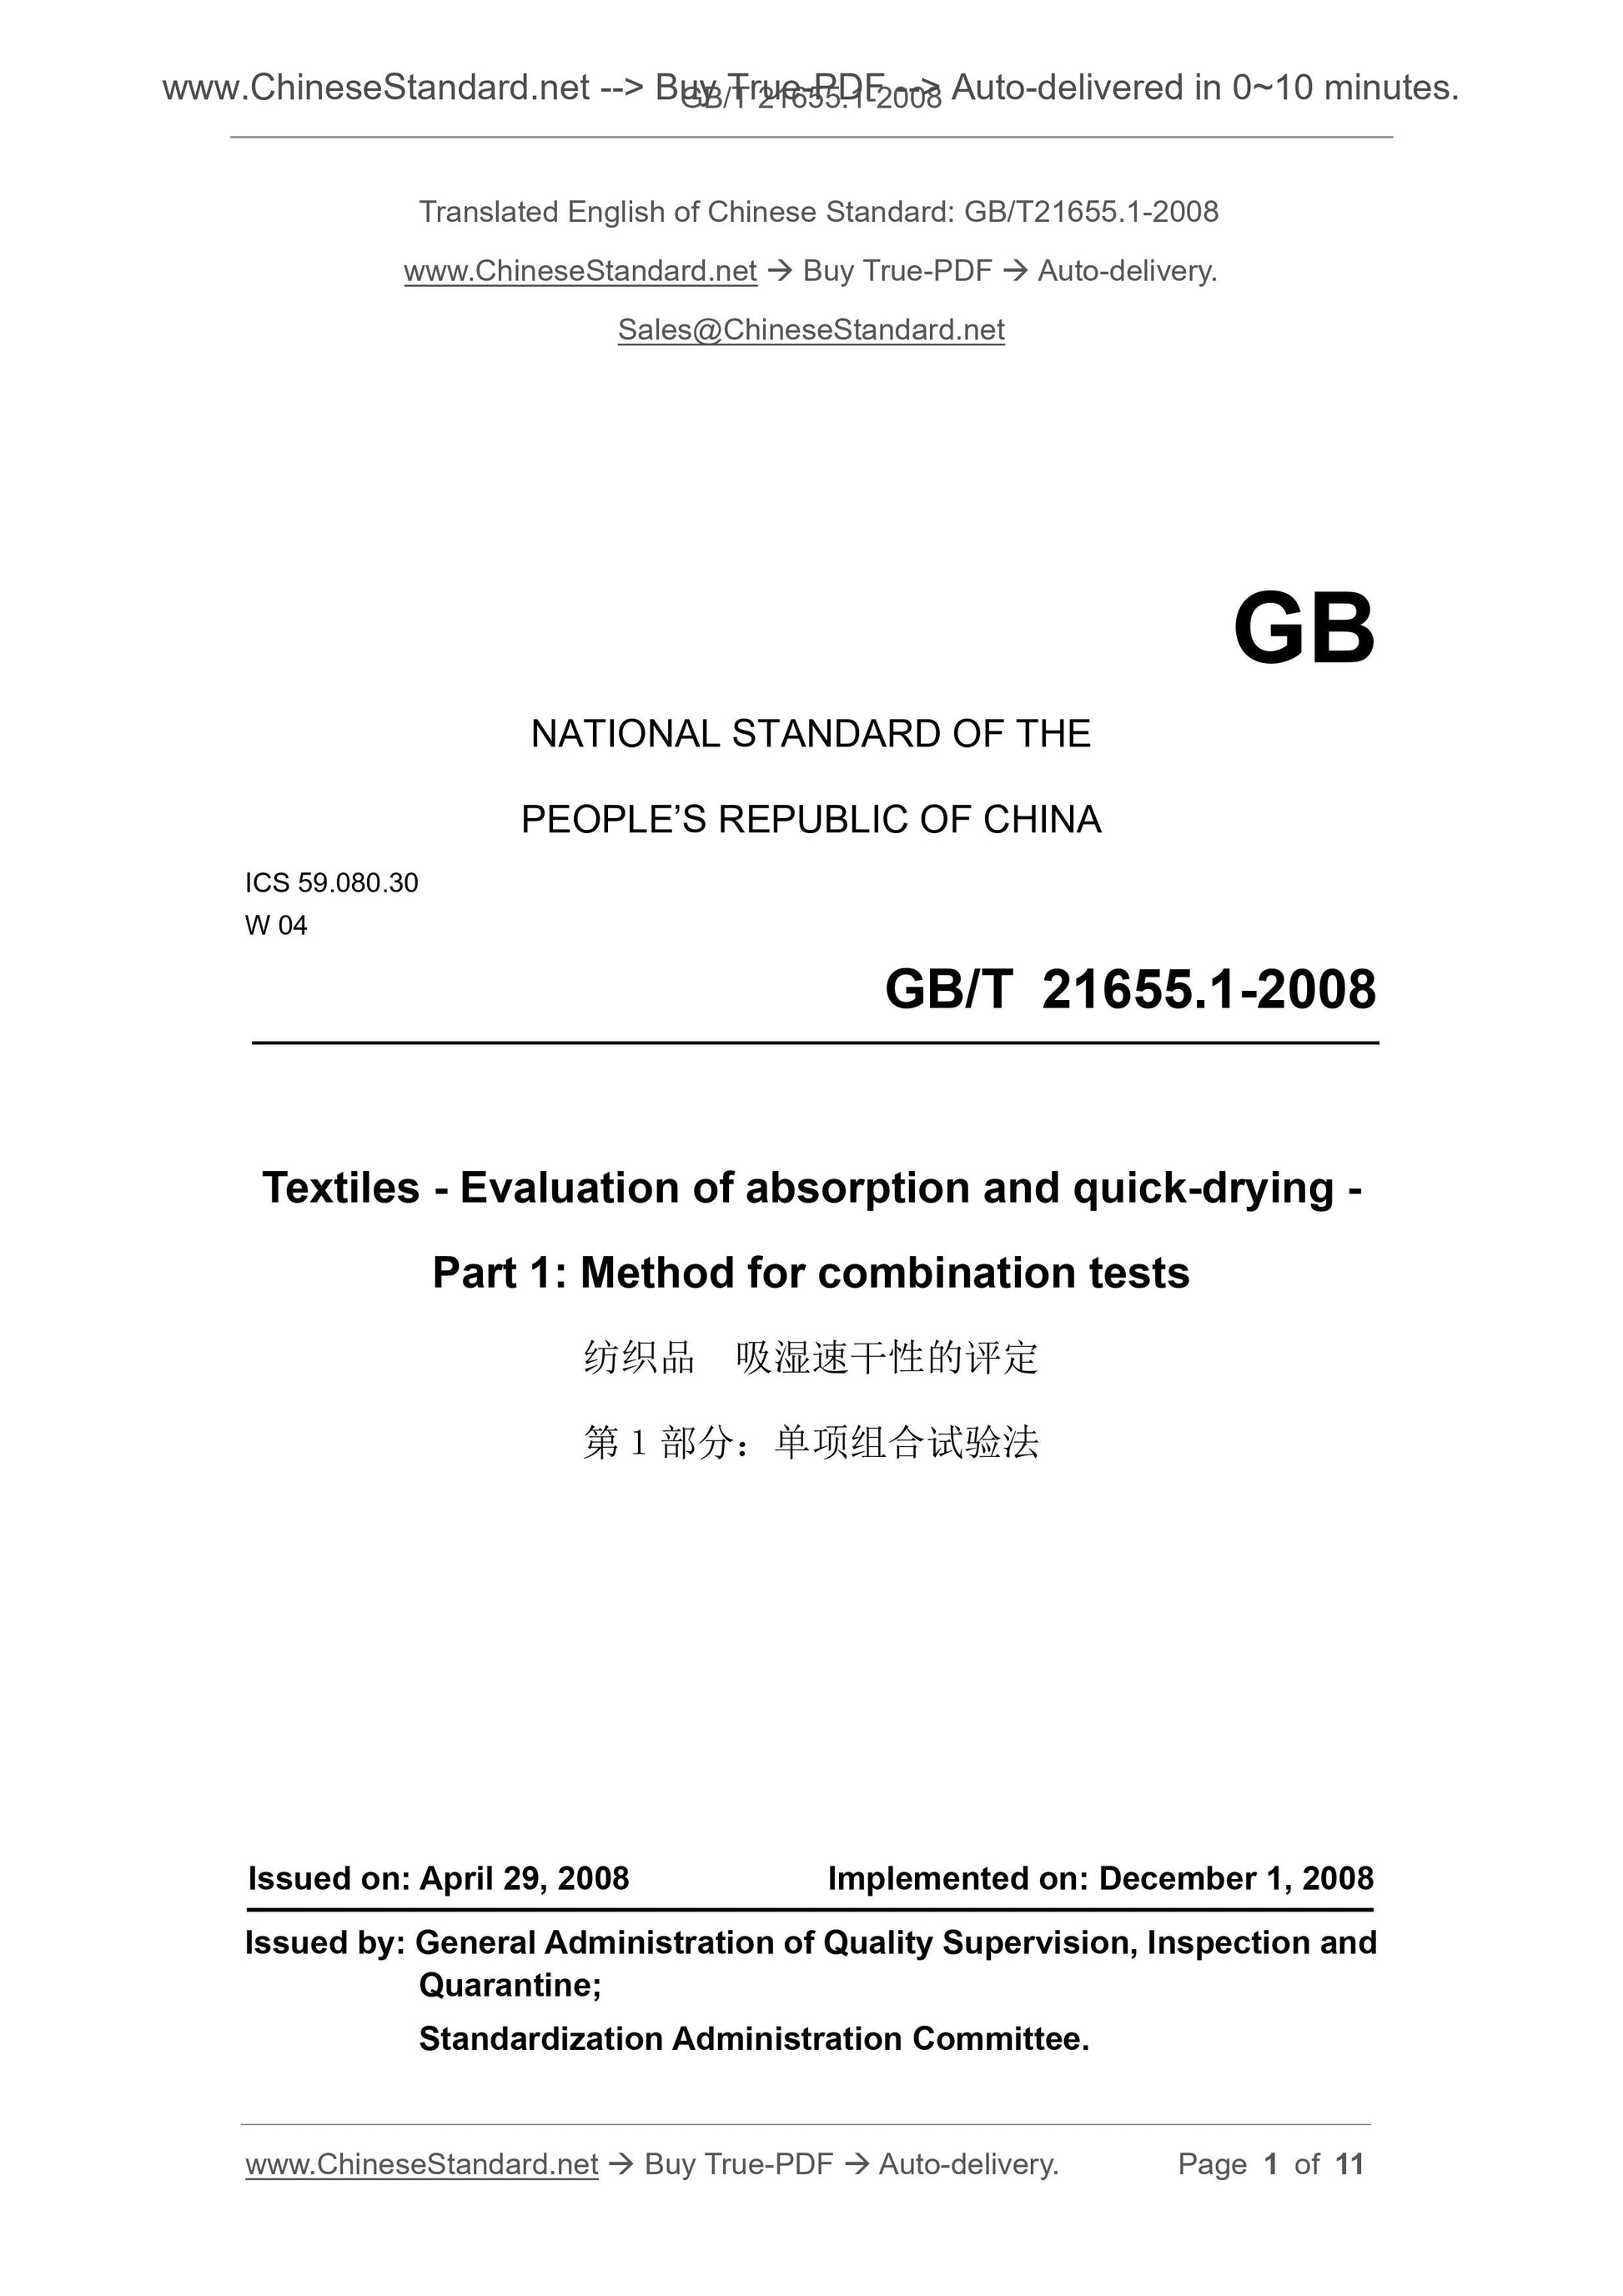 GB/T 21655.1-2008 Page 1